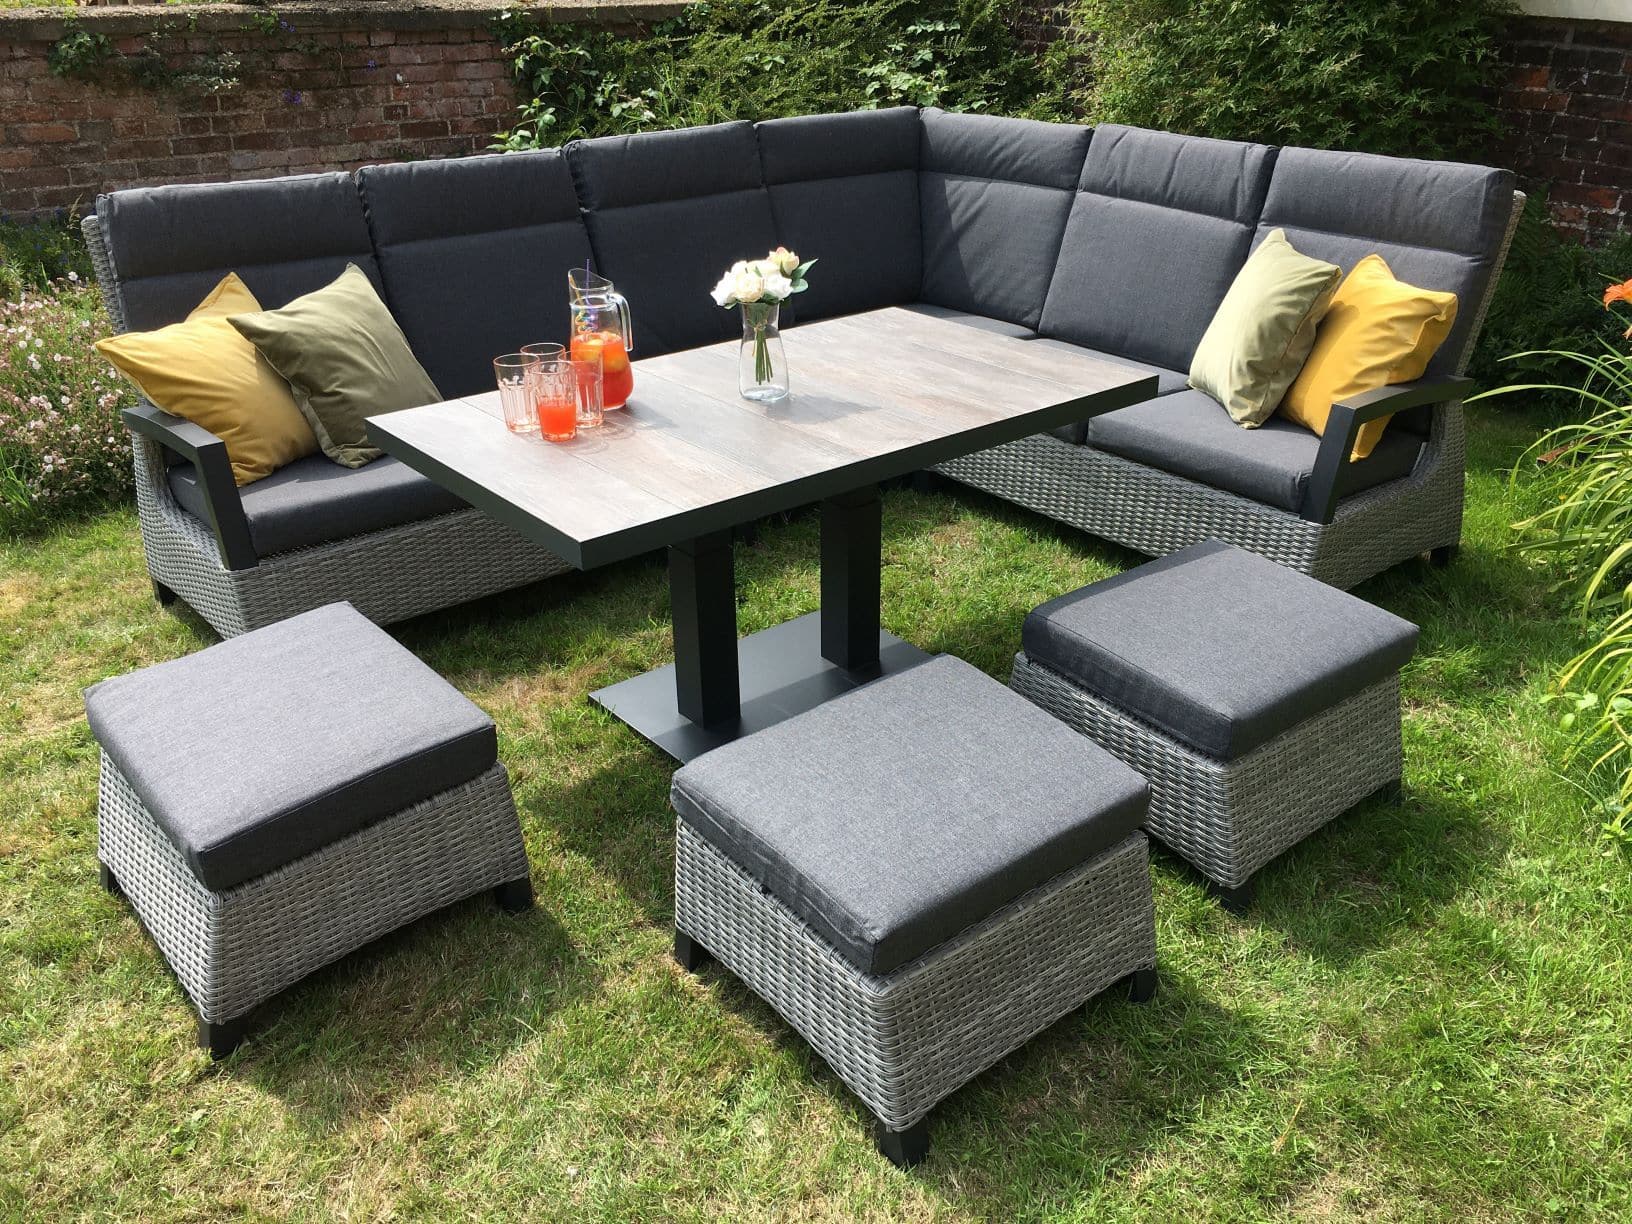 Outdoor Modular Corner with Adjustable Table in Grey - Kendal By Vila